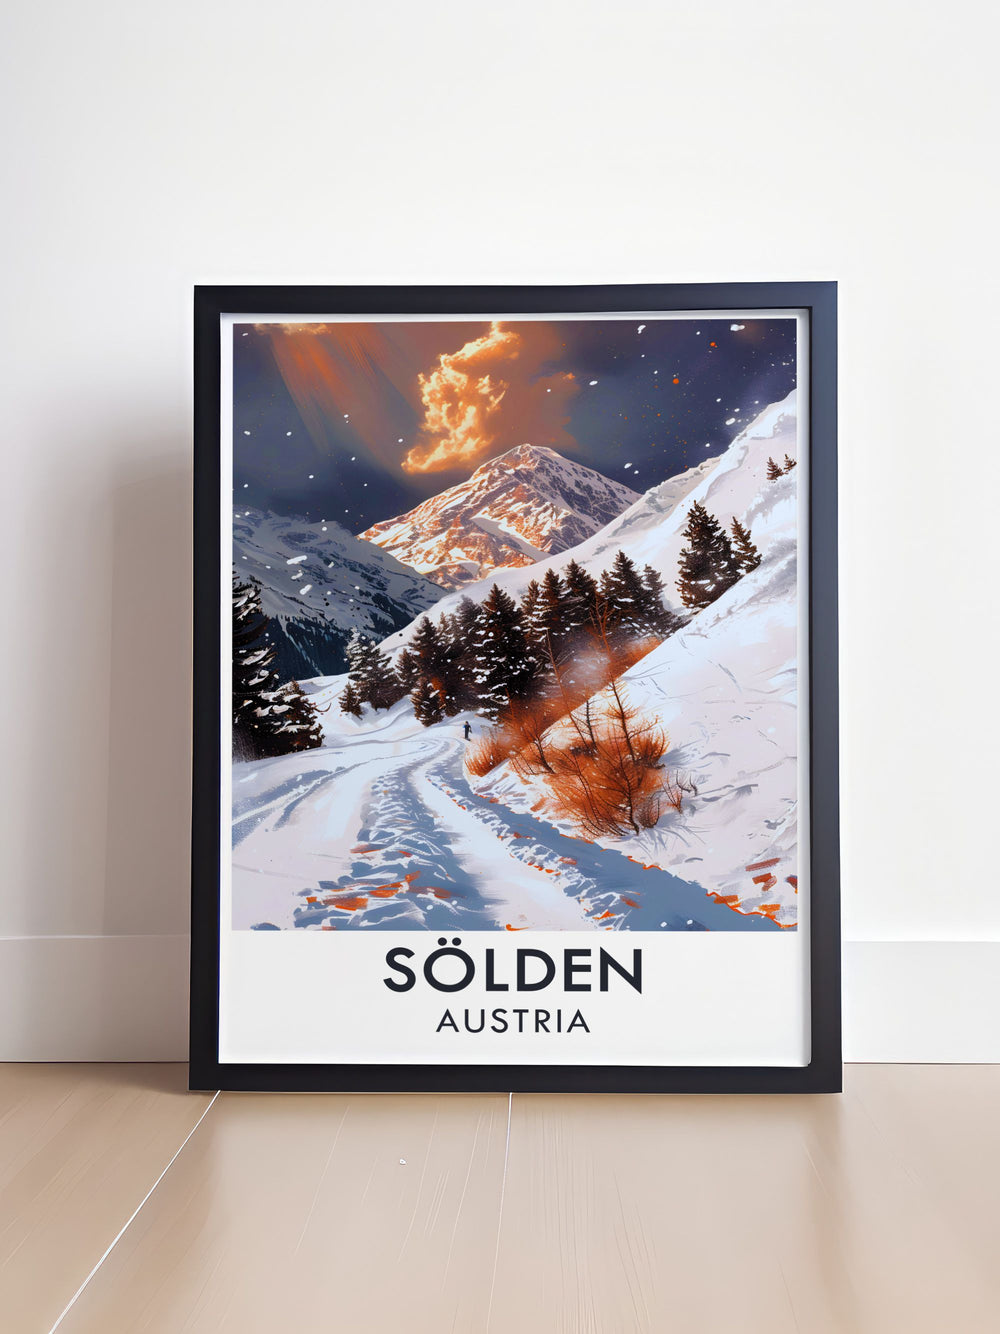 Featuring the stunning views of Solden Ski Resort and the majesty of Rettenbach Glacier, this travel poster is perfect for those who love exploring alpine destinations and experiencing the thrill of winter sports.